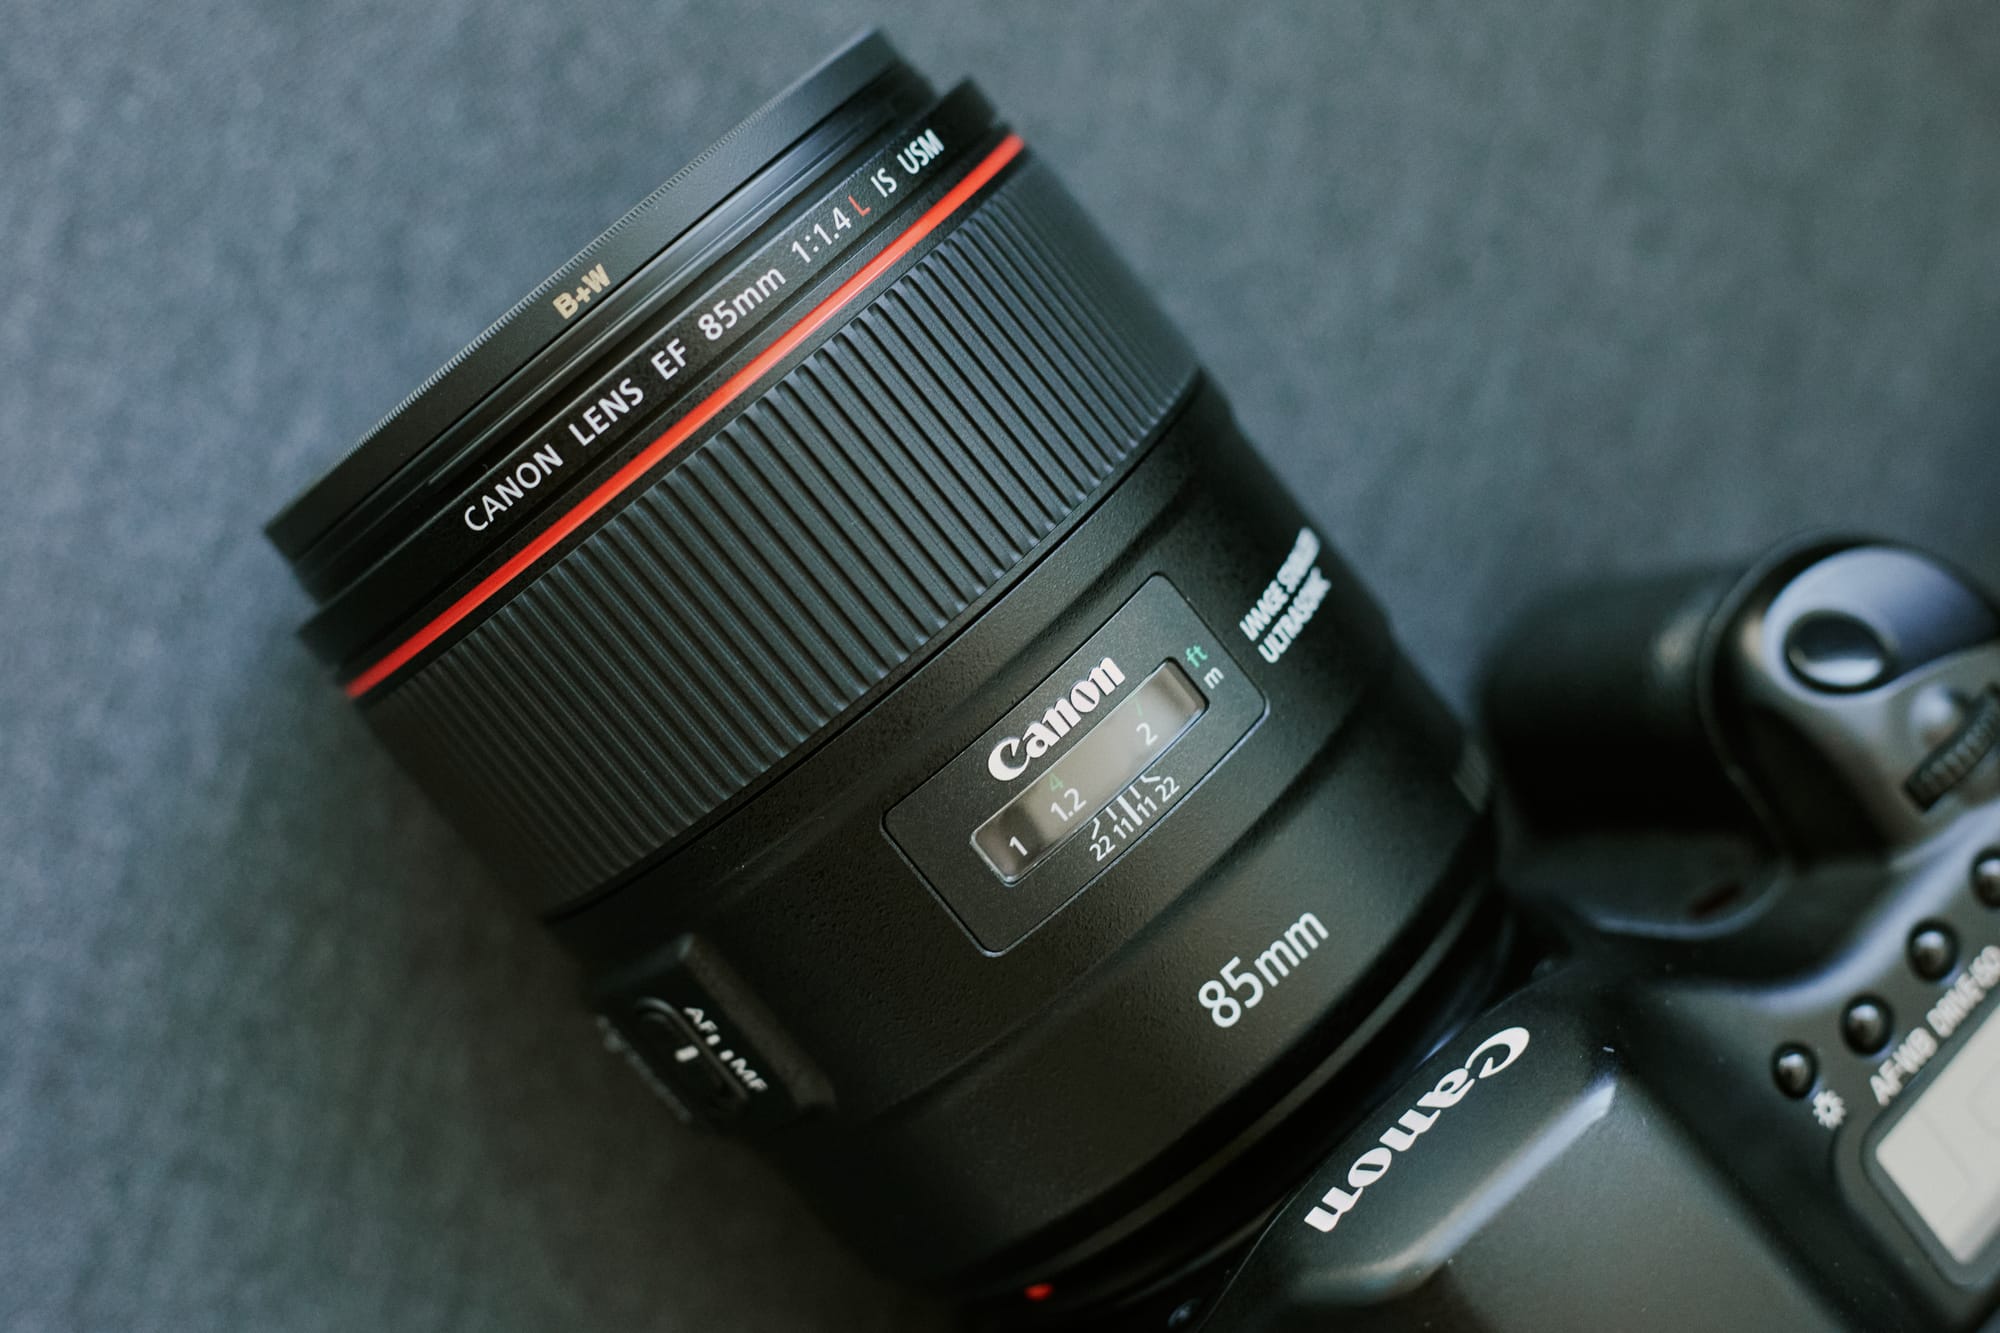 A Review Of The Canon EF 85mm f/1.4L IS USM Lens